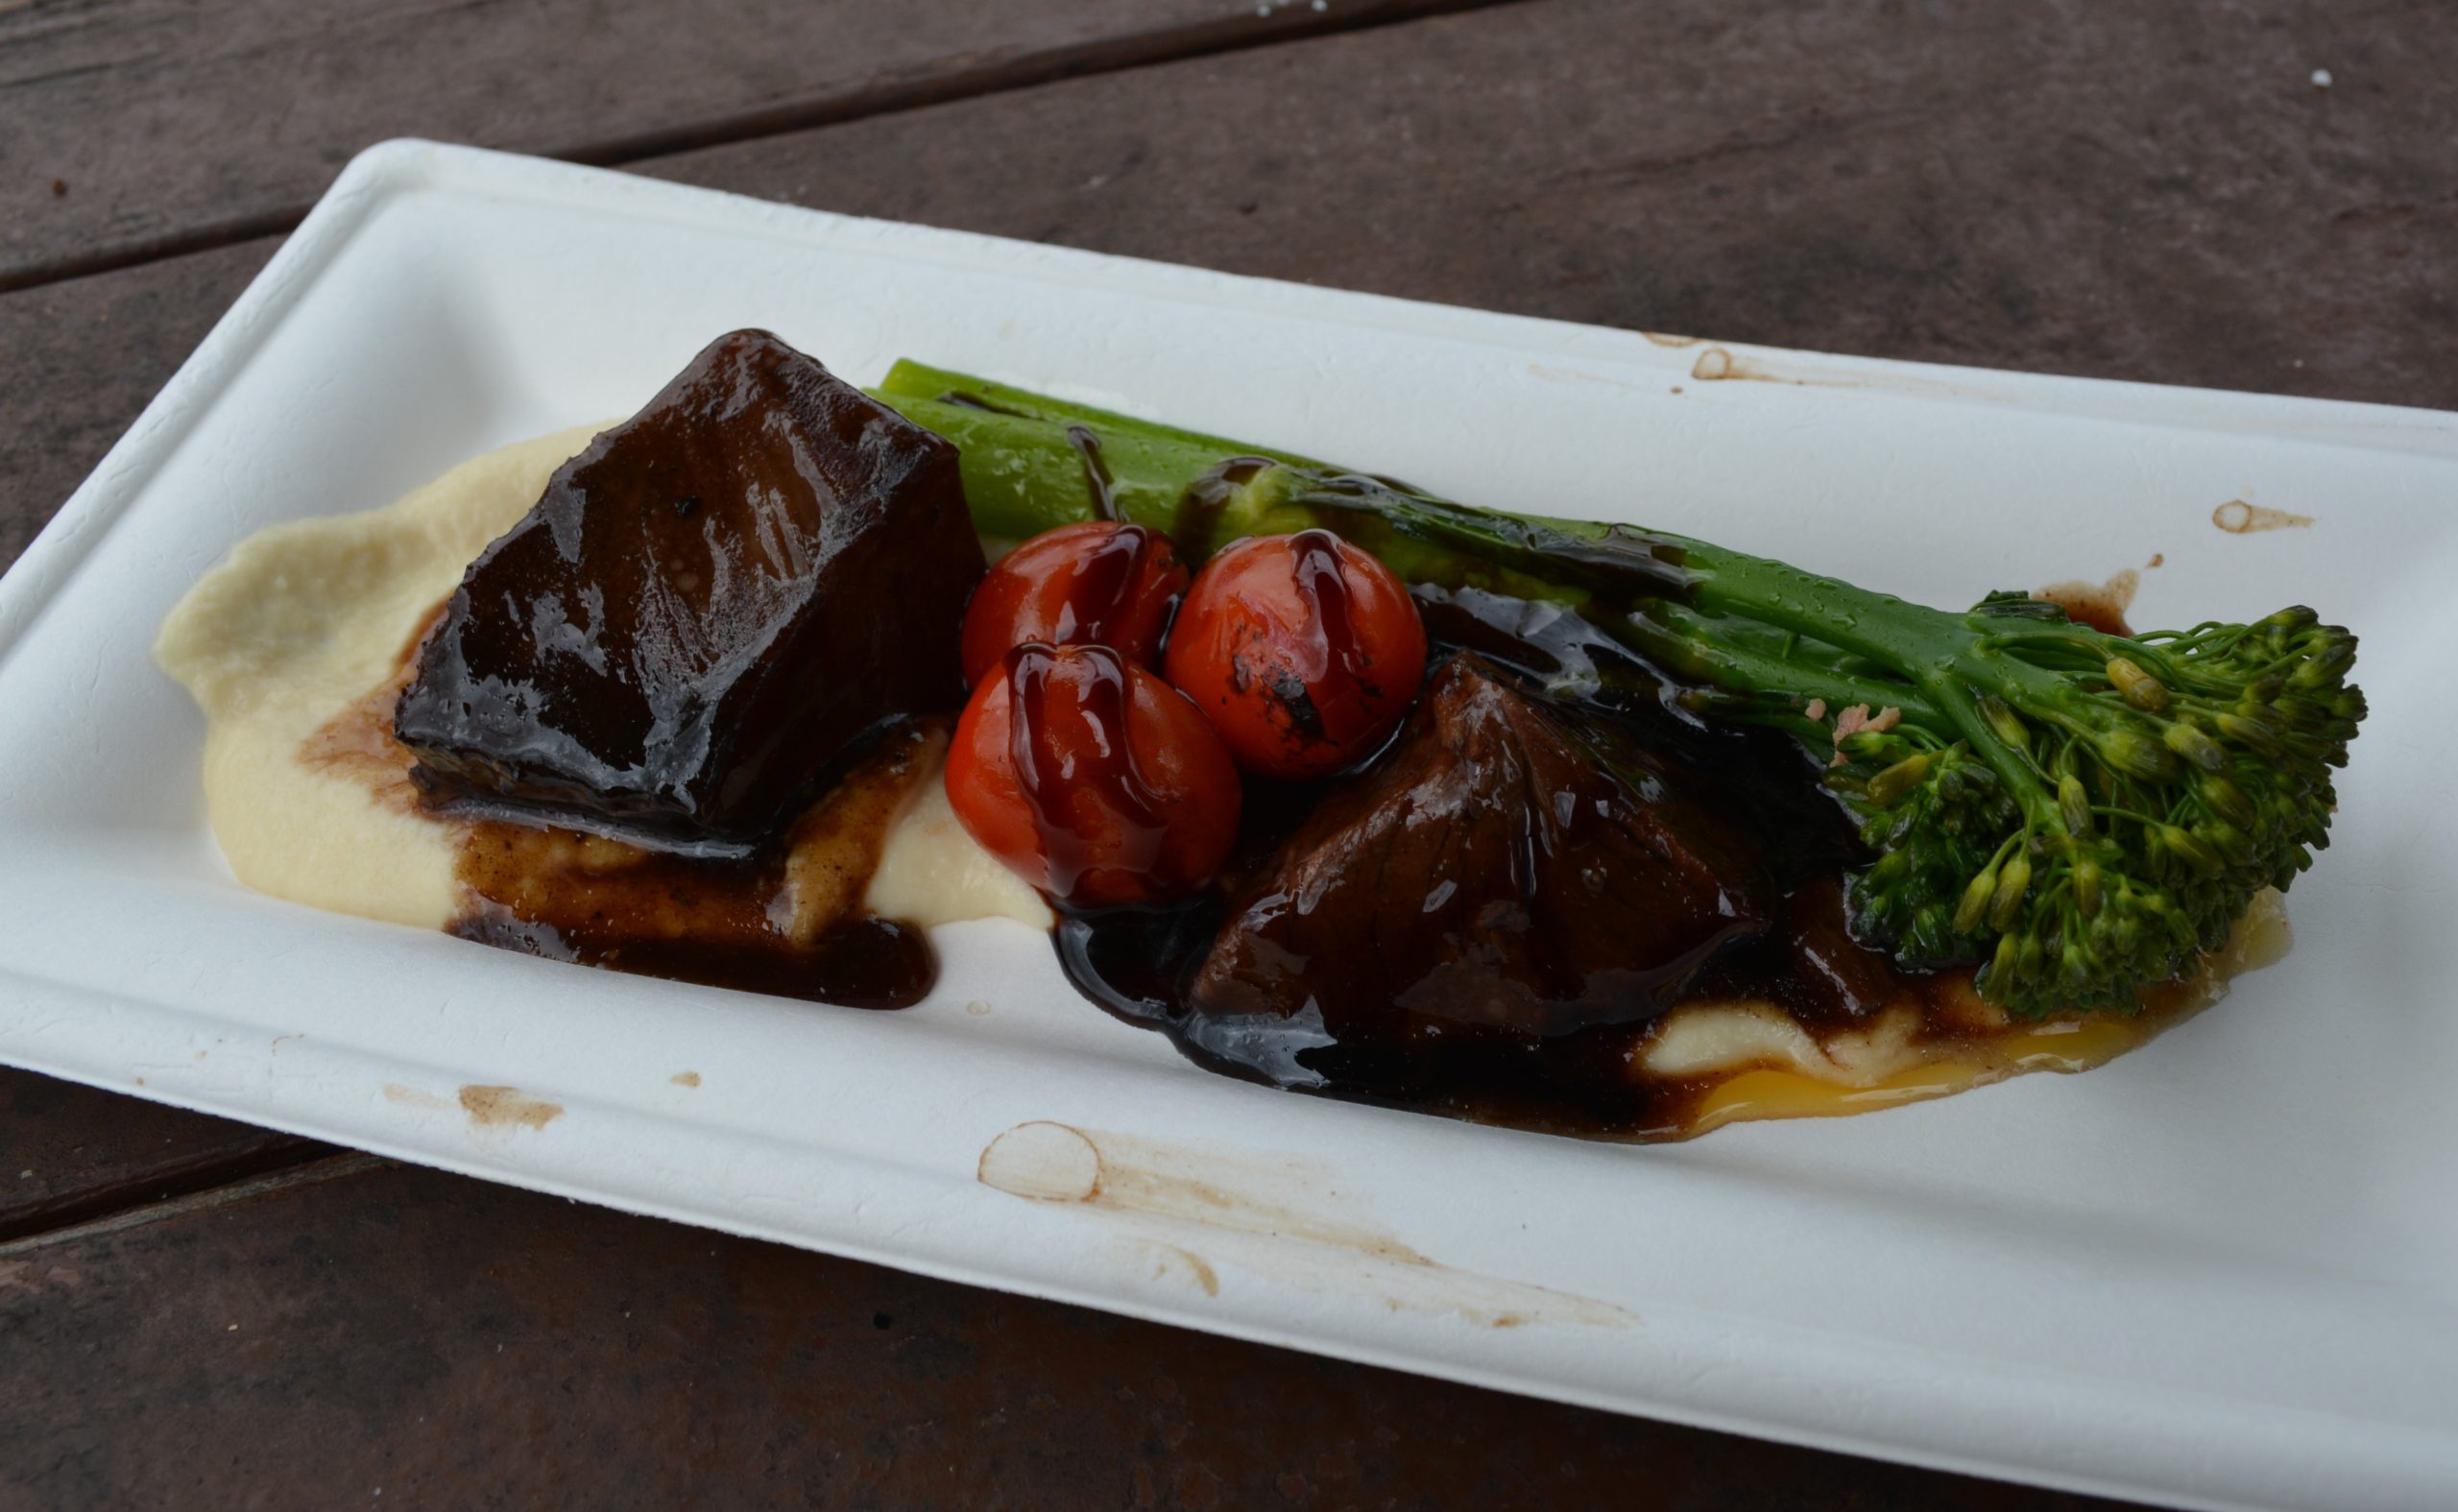 Red Wine-braised Beef Short Rib with Parsnip Purée, Broccolini, Baby Tomatoes and Aged Balsamic from Cuisine Classique in Germany